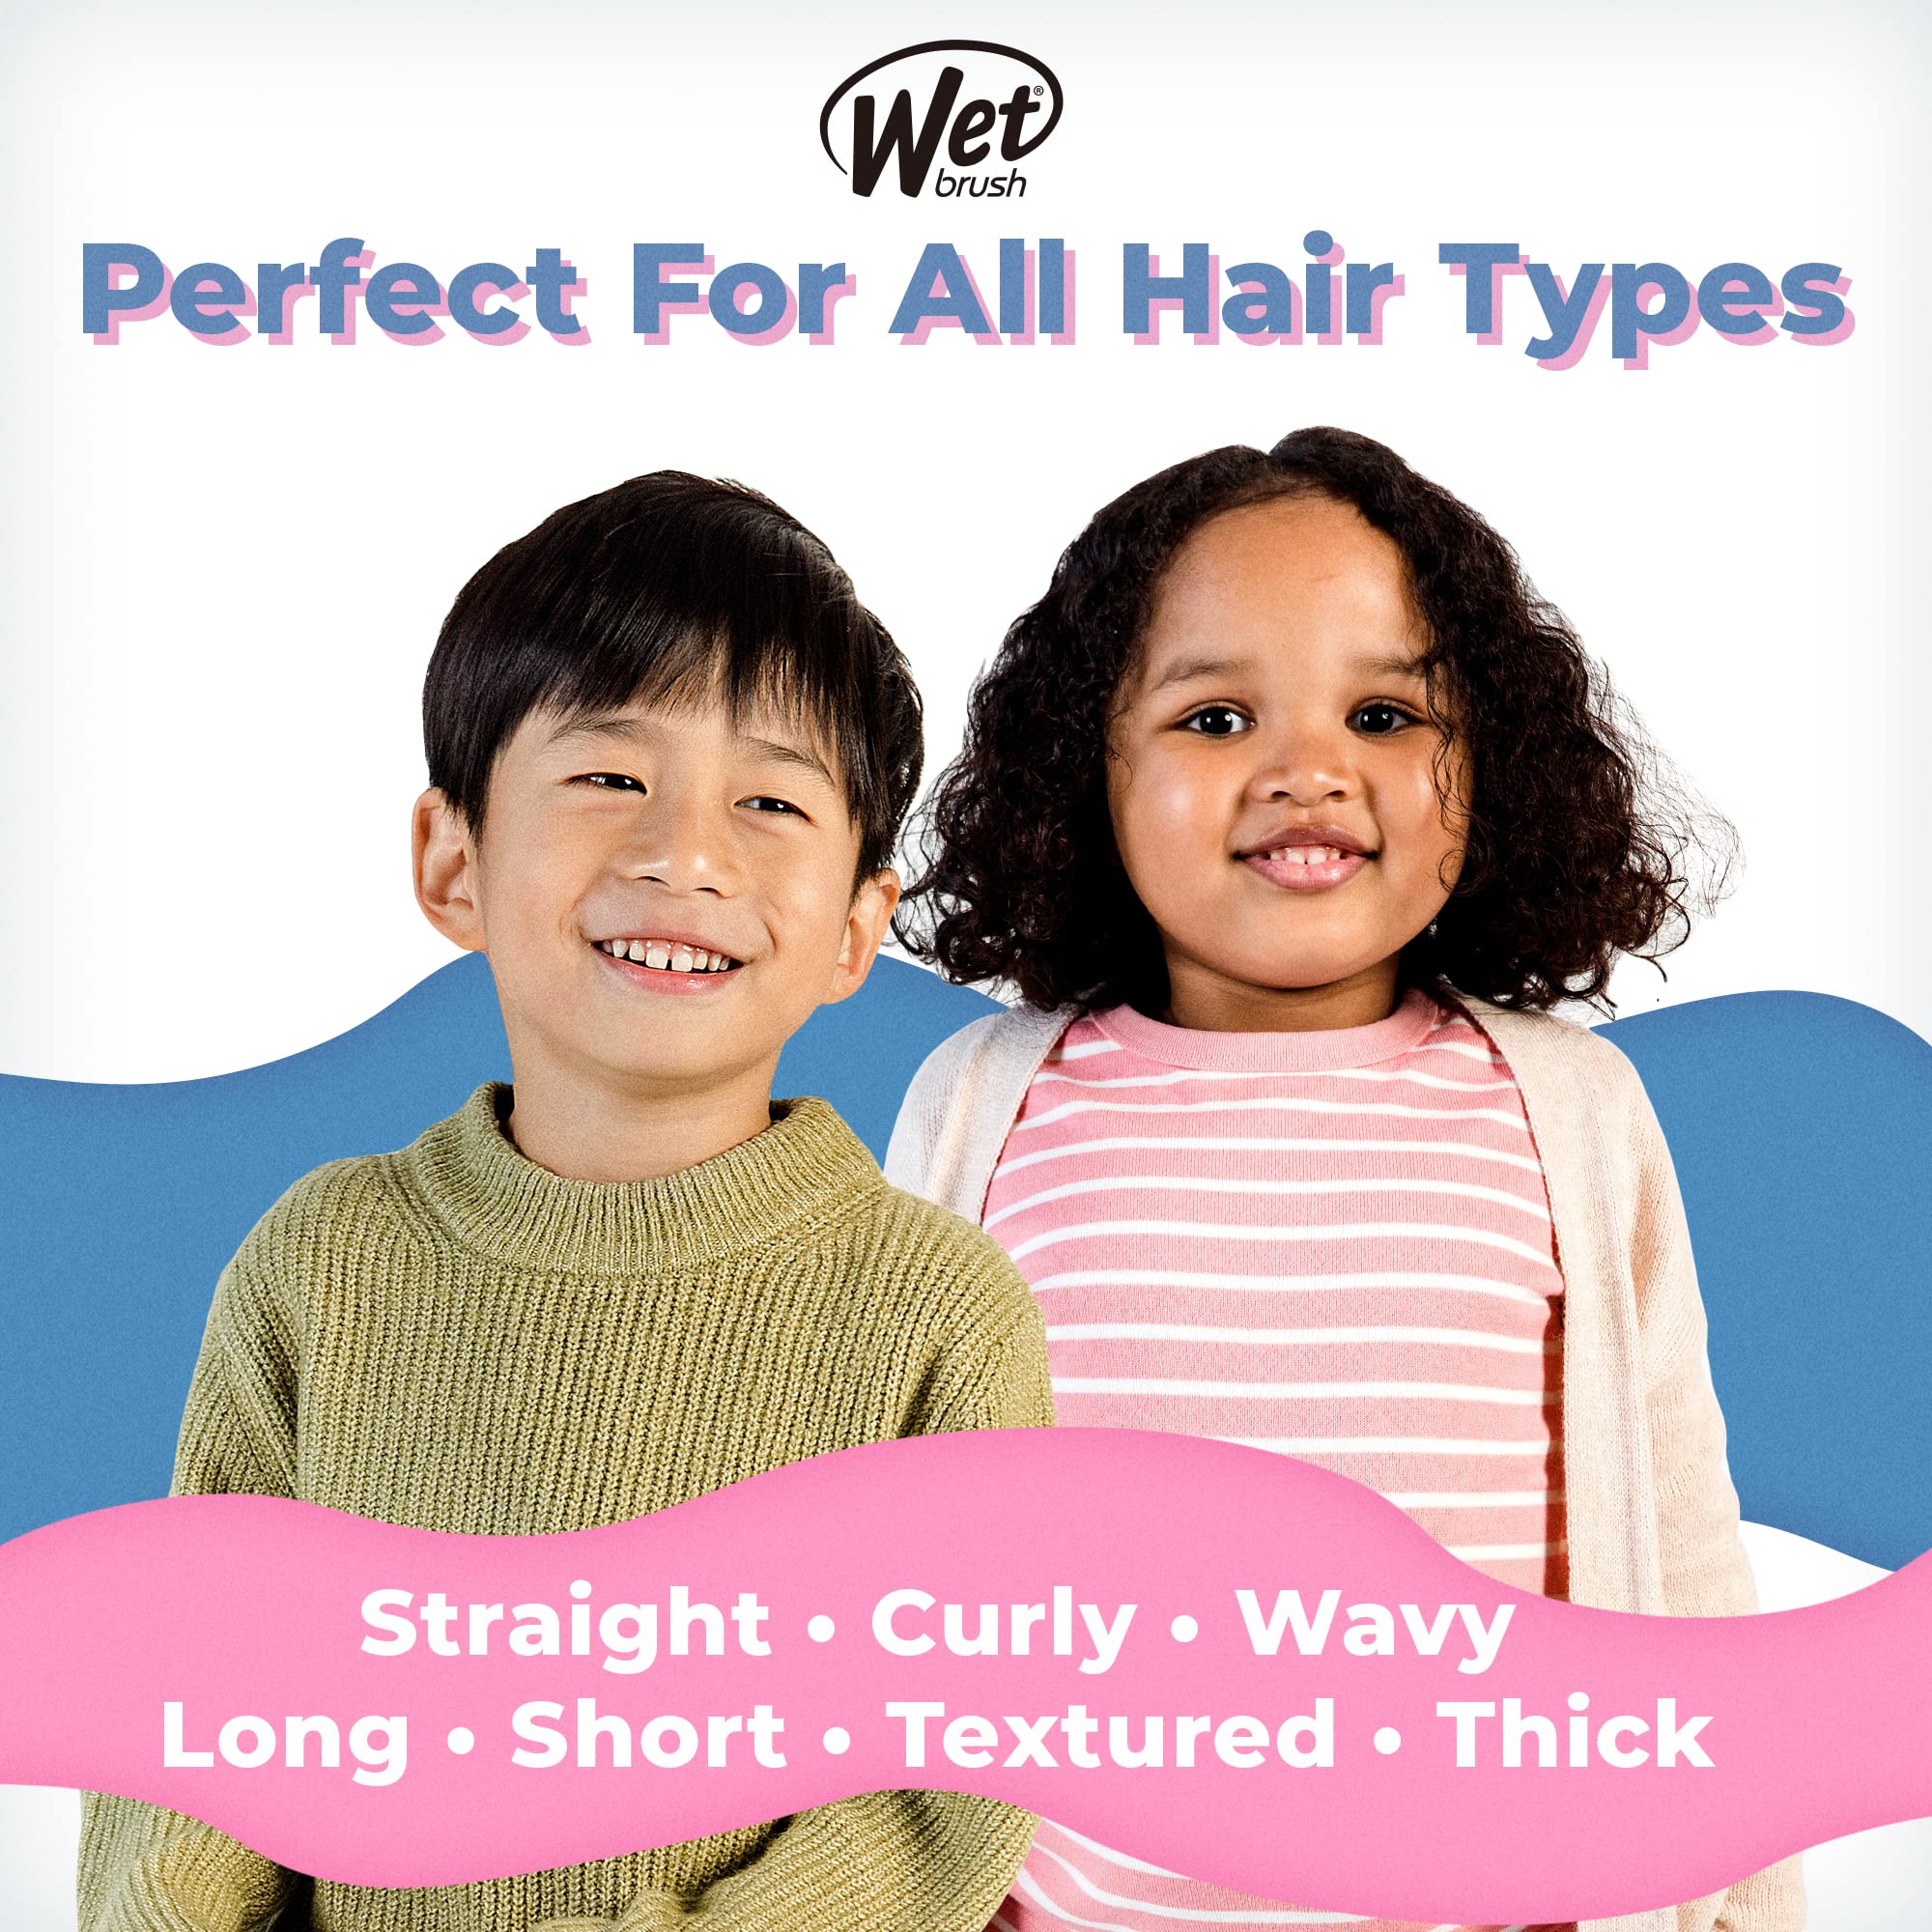 Wet Brush Kids Detangler Hair Brushes - Galaxy - Midi Detangling Brush With Ultra-Soft IntelliFlex Bristles Glide Through Tangles With Ease - Pain-Free Comb For All Hair Types